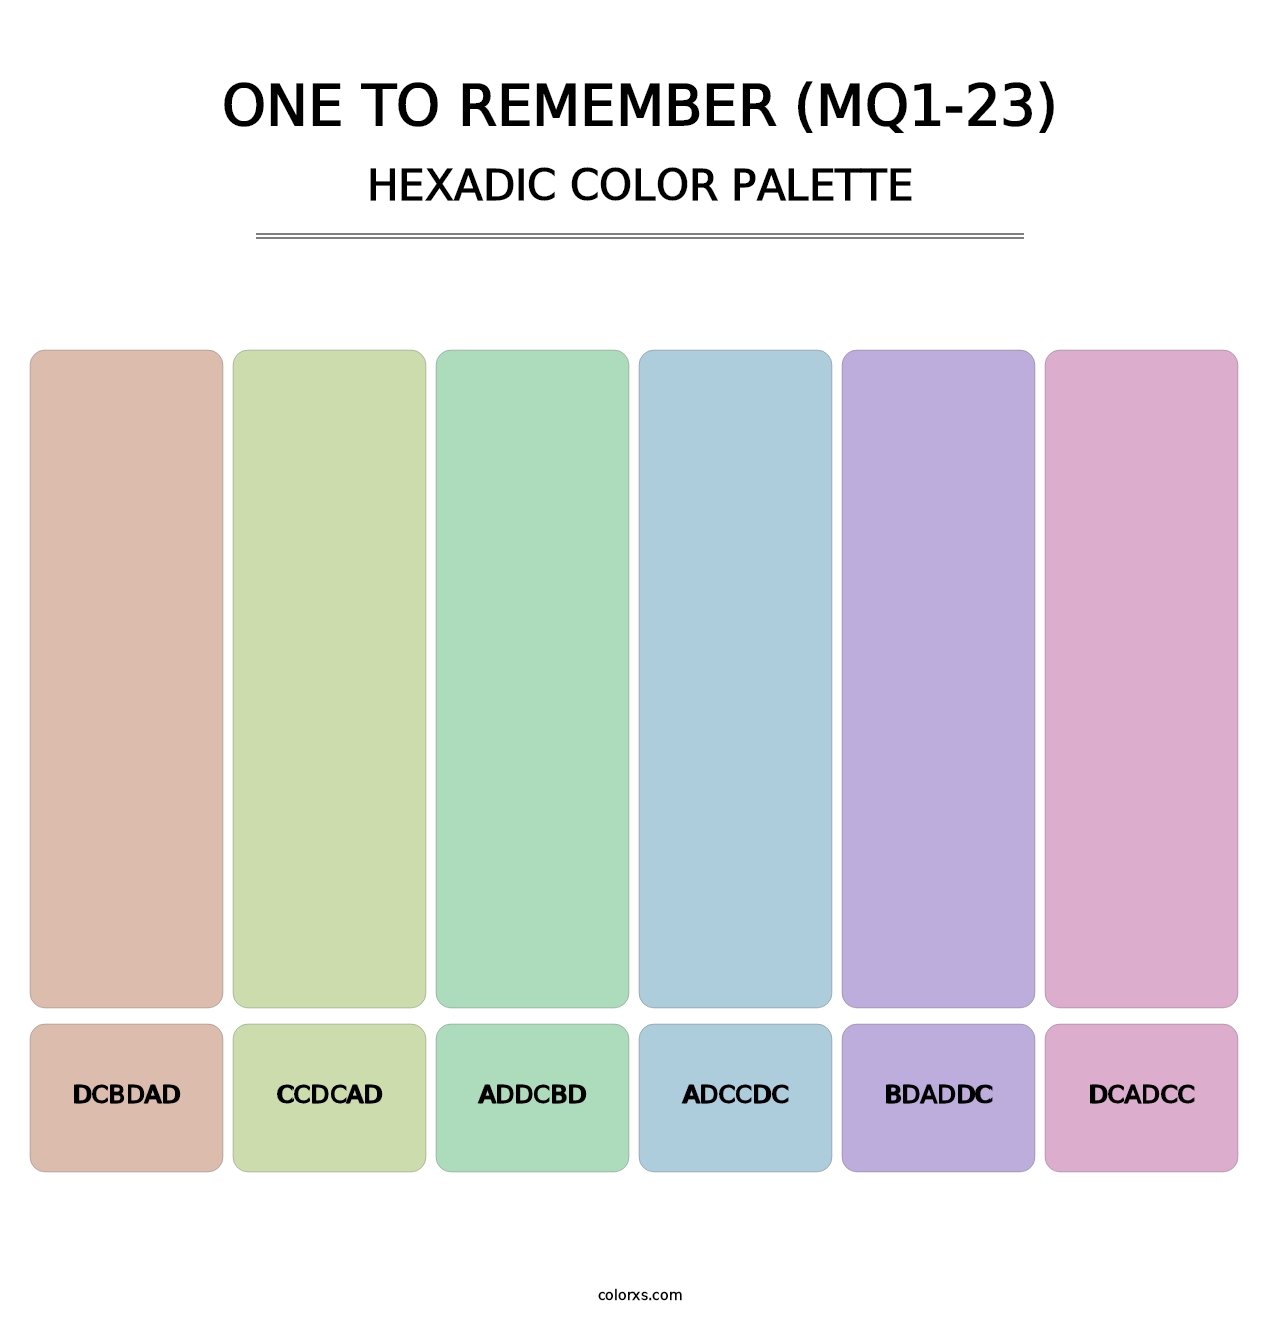 One To Remember (MQ1-23) - Hexadic Color Palette